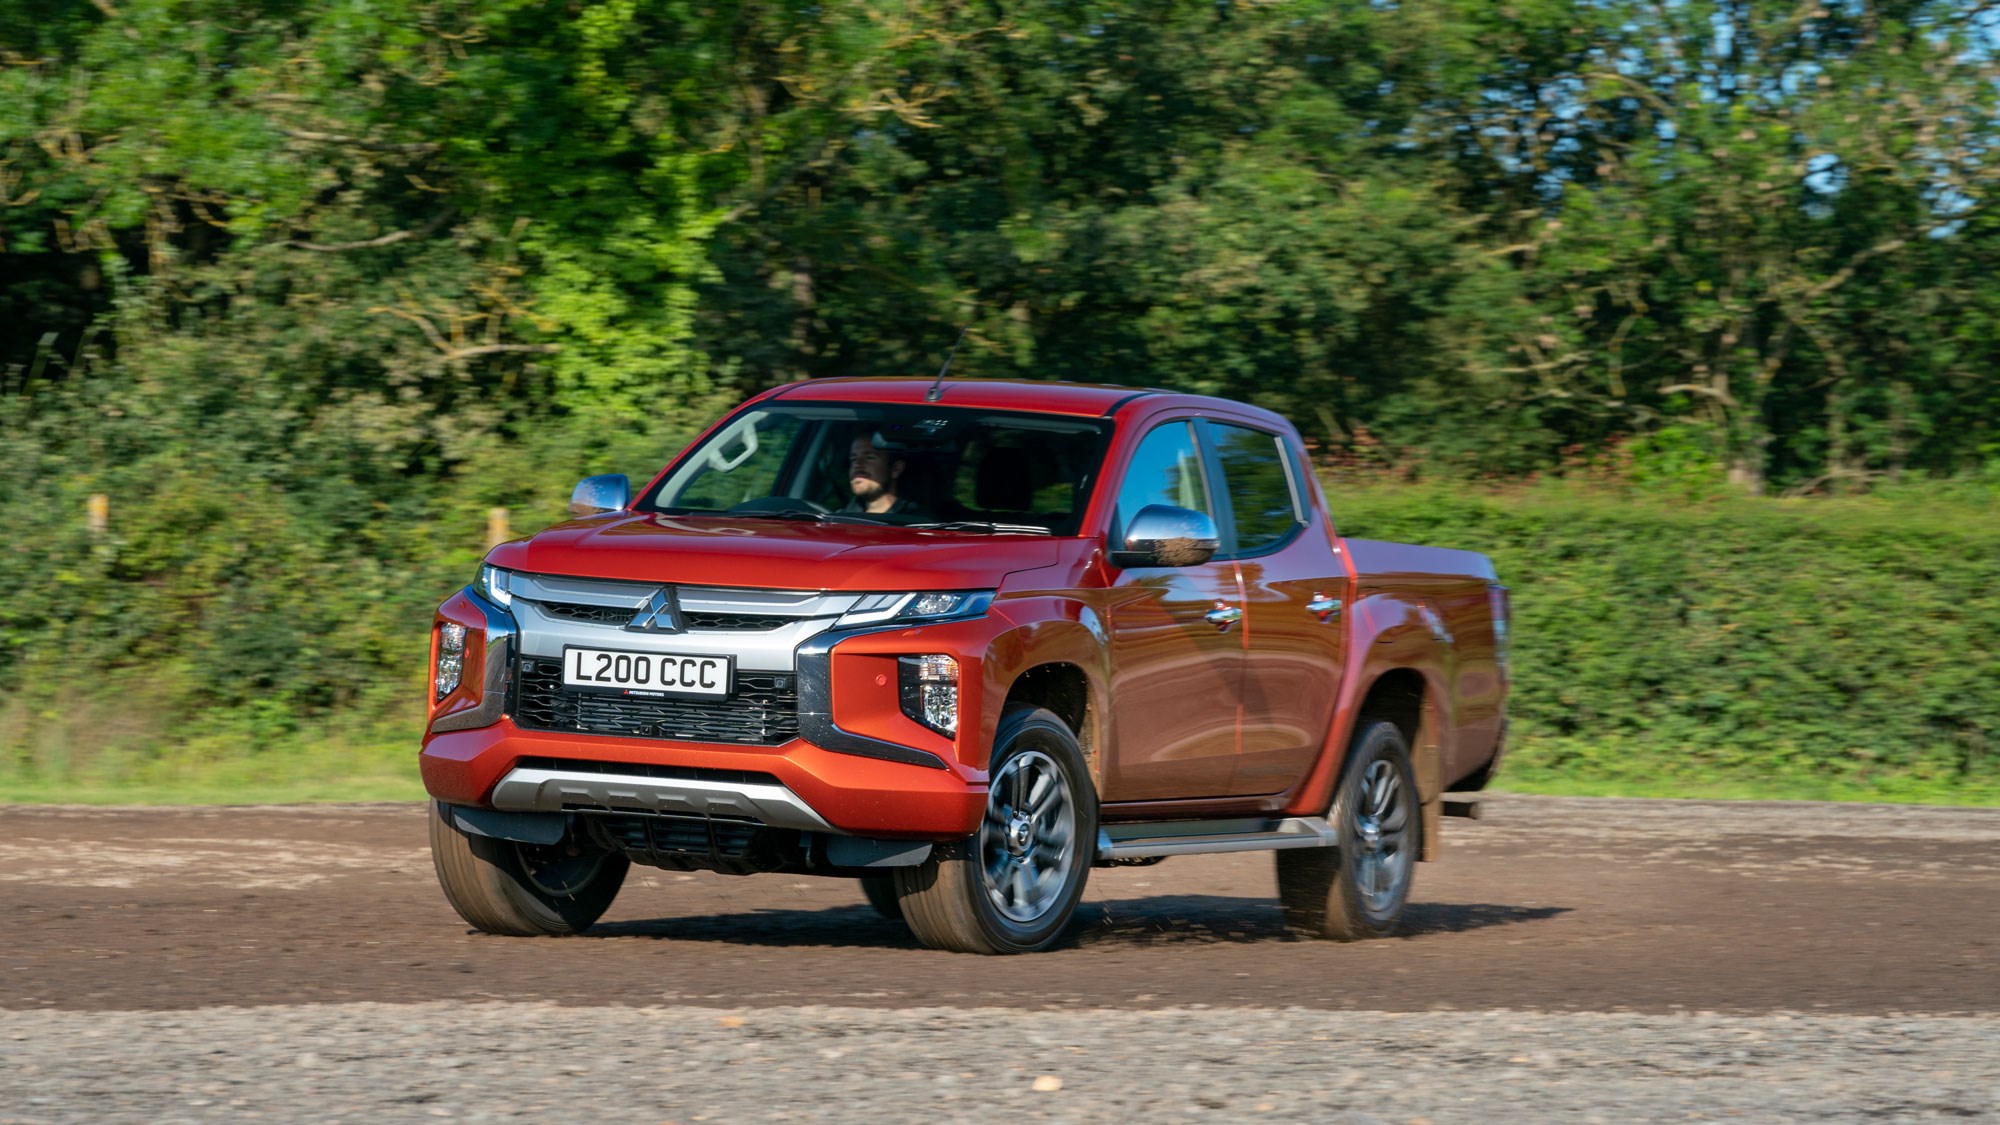 Forty years of the Mitsubishi L200 pick-up